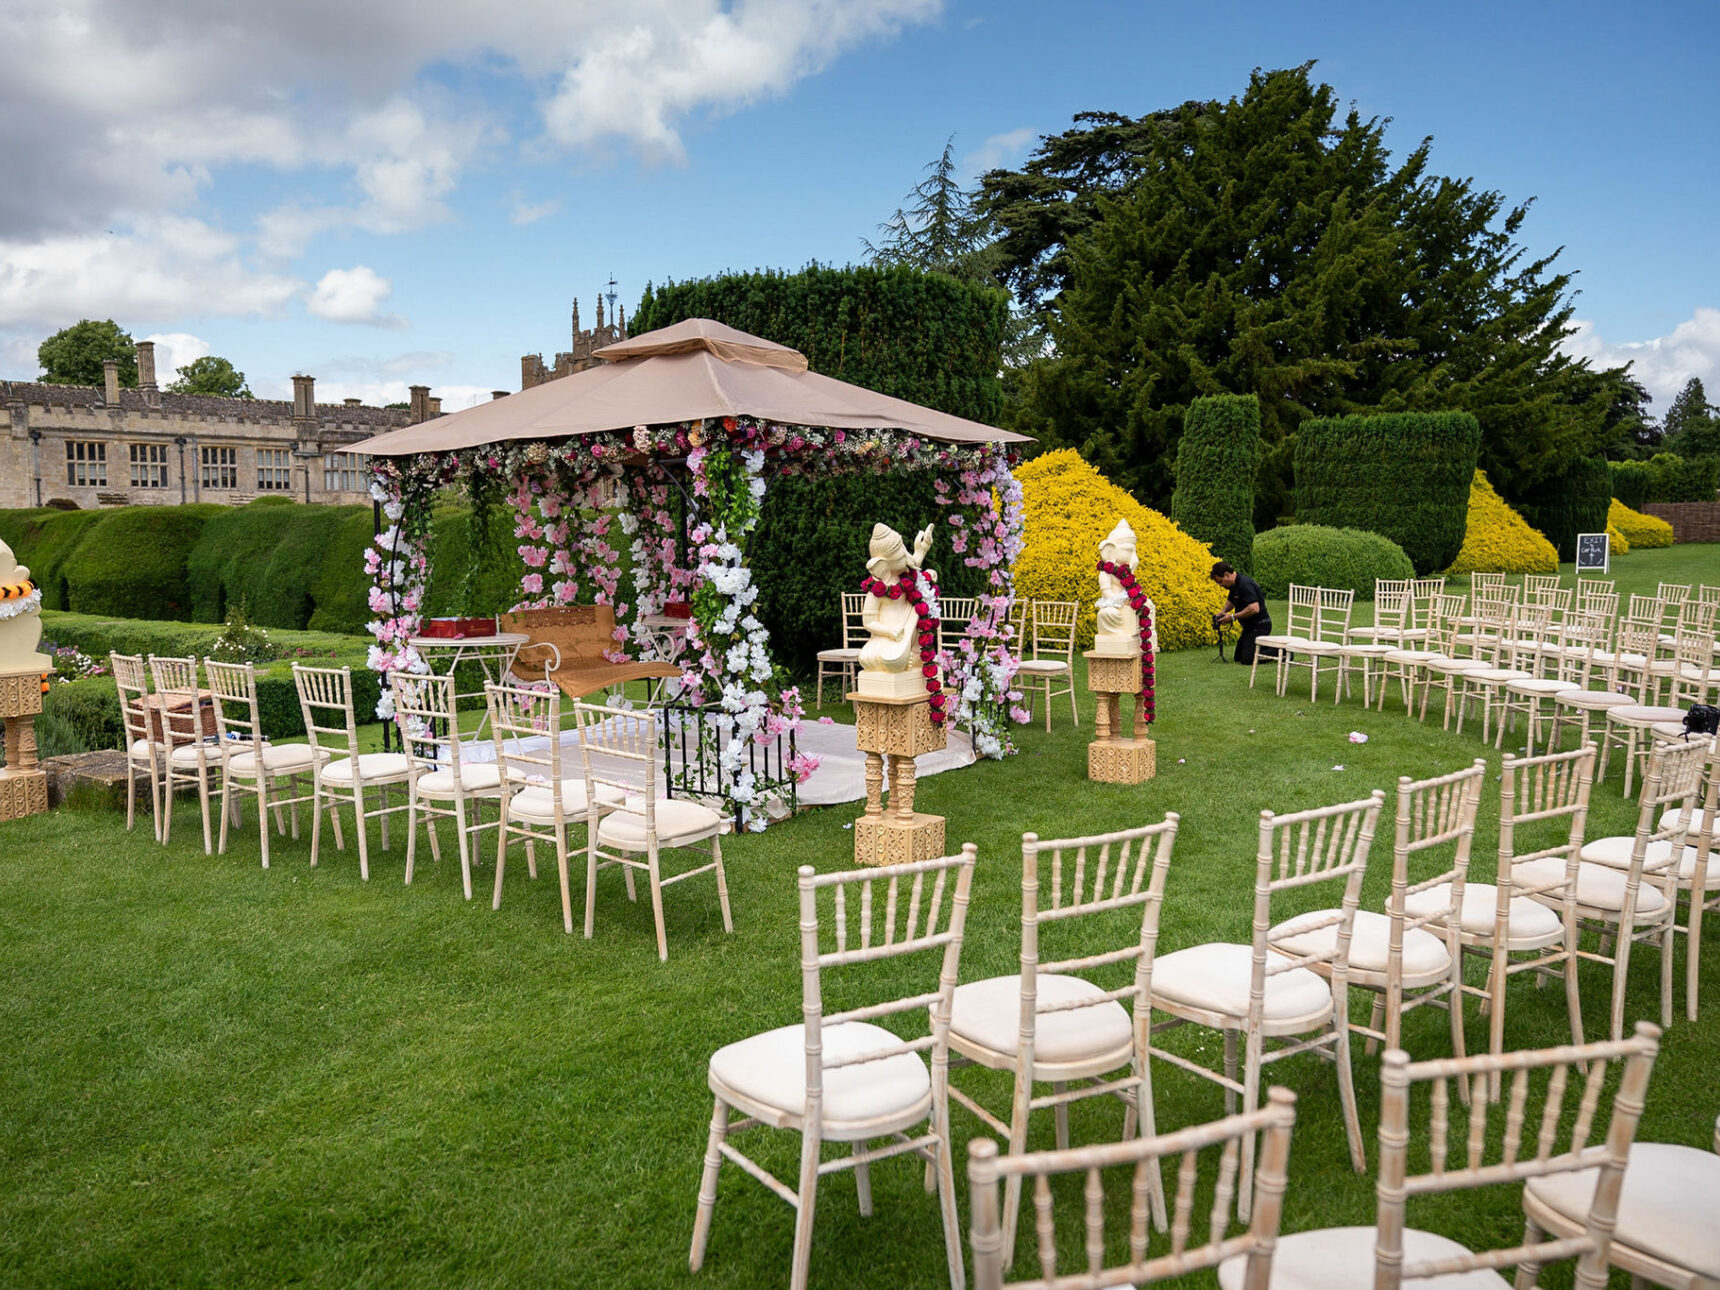 Overlooking the Queen's Garden, Castle and romantic ruins, the Haha is an extraordinary wedding ceremony location